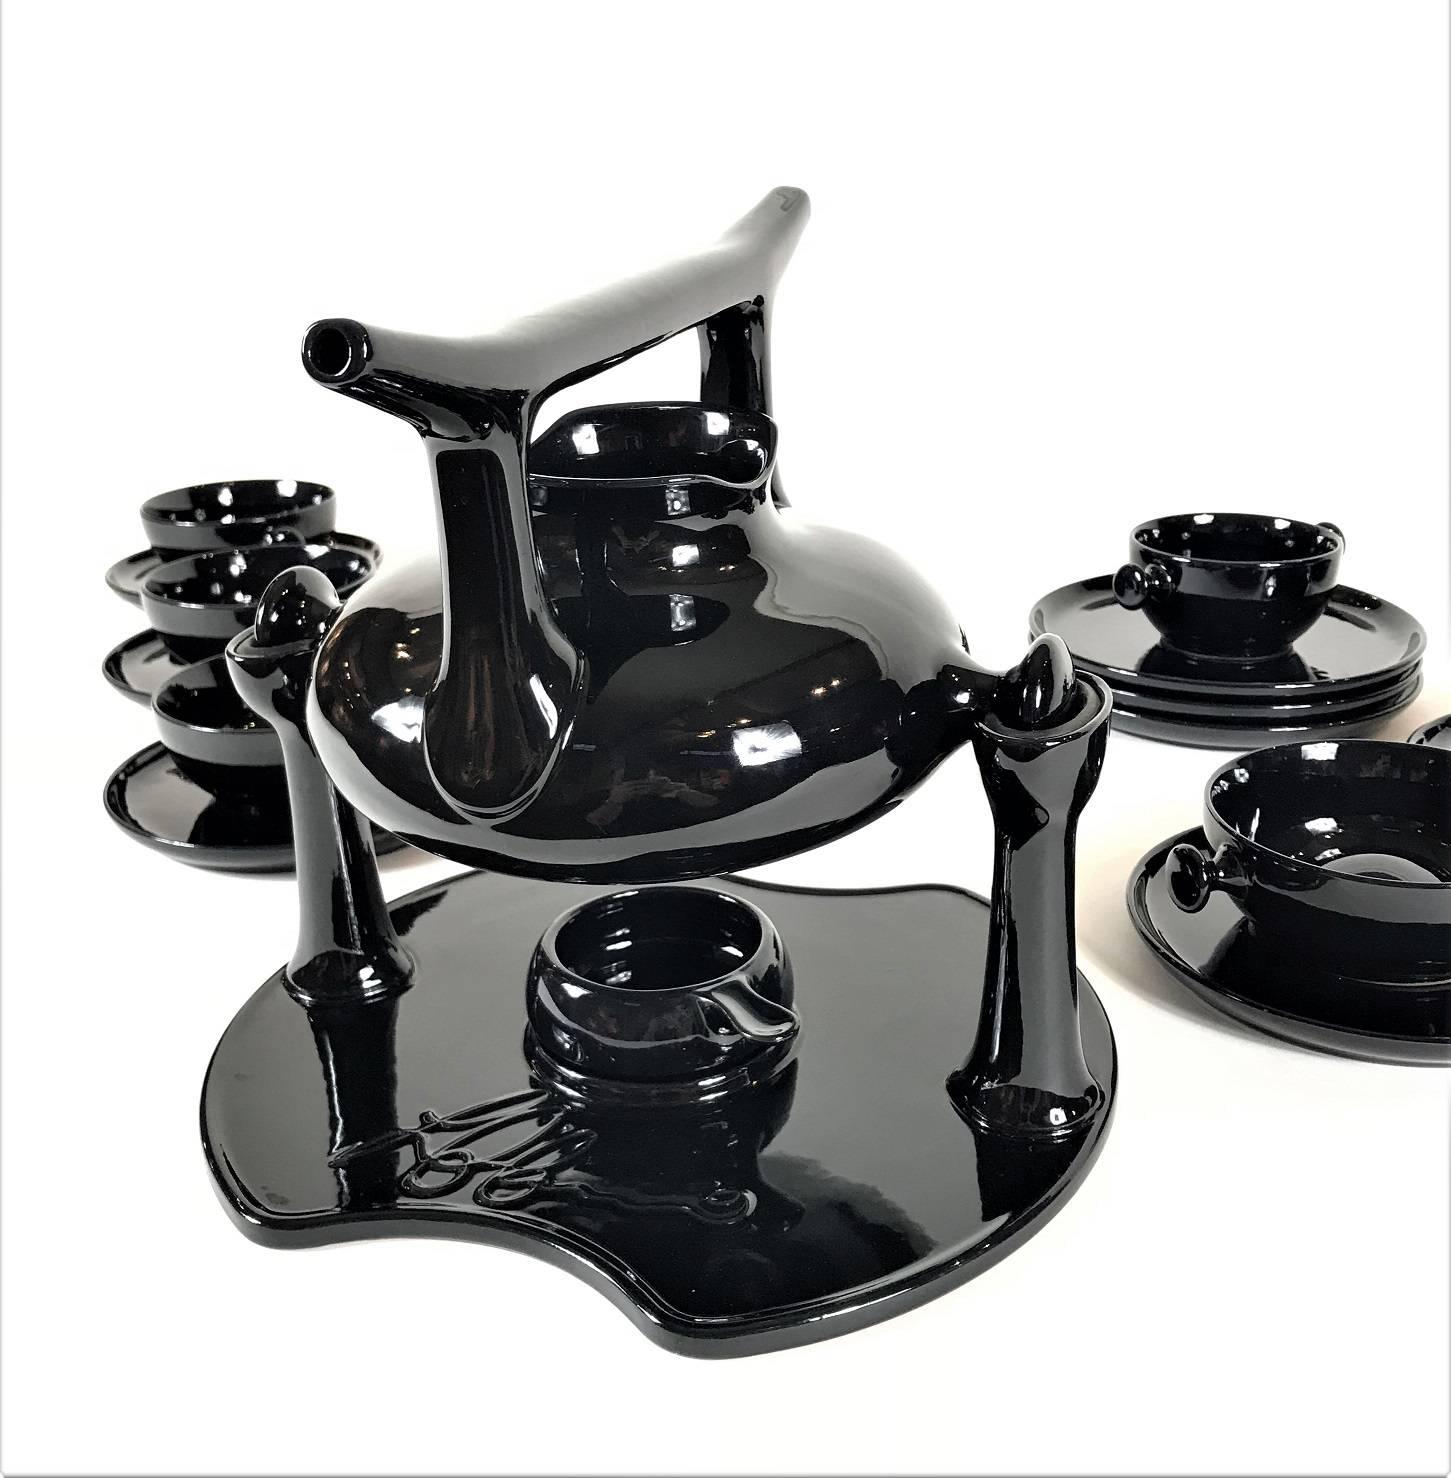 A 1973 complete tea set designed by Luigi Colani for Friesland, Germany. This Ceracron earthenware tea set is black glazed. The set consists of: Tea pot, warming stand, six cups and plates, six dessert plates, tea light holder, milk and sugar bowl.